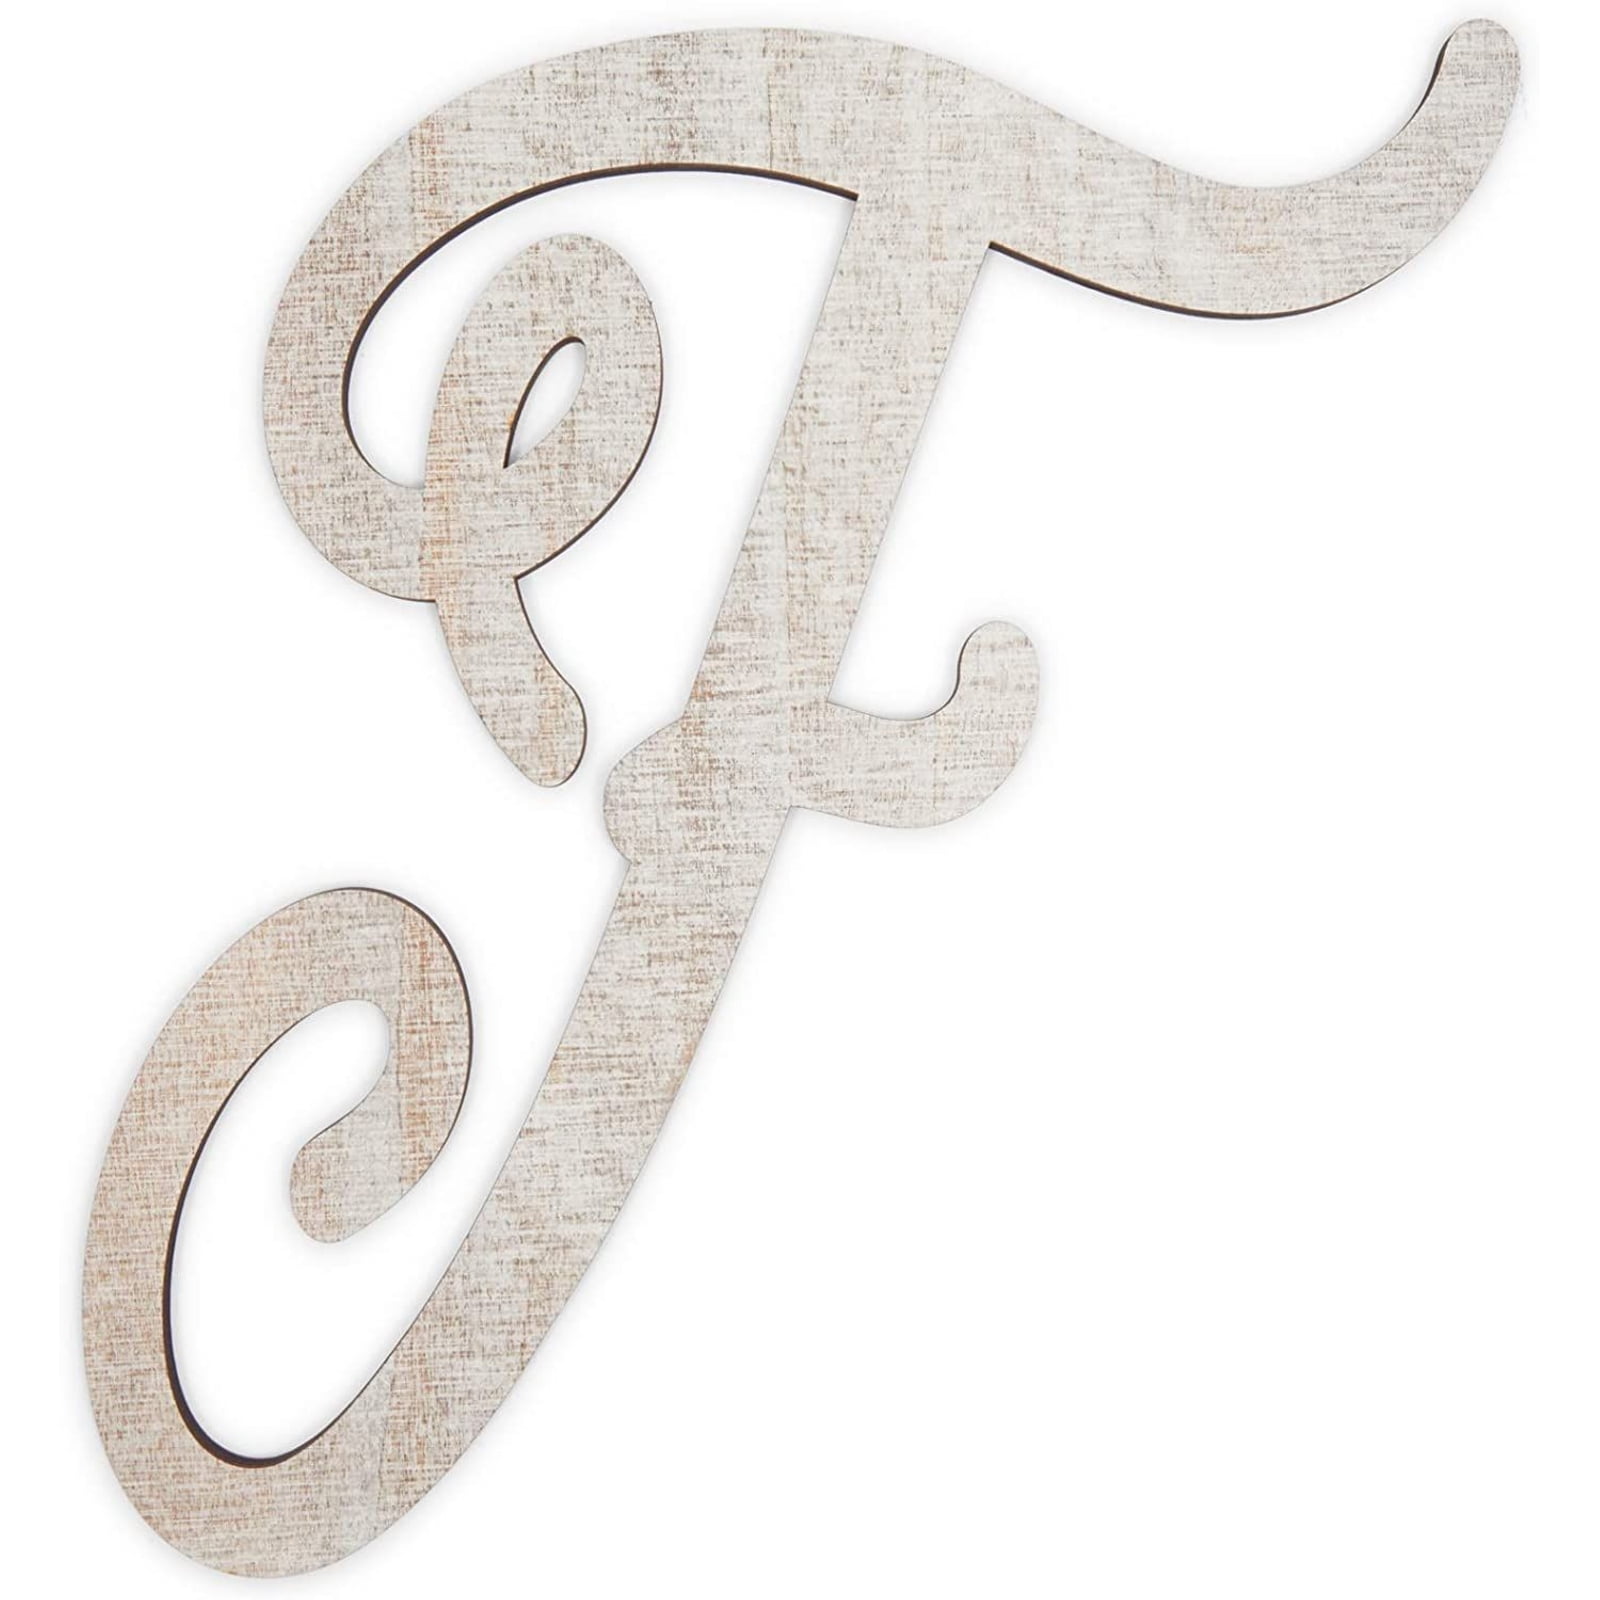 13-inch Unfinished Wooden Monogram Letter Z, Rustic-Style Home Decor, Paintable Wood Alphabet Letters for Custom Signs, Party Decorations, Crafting